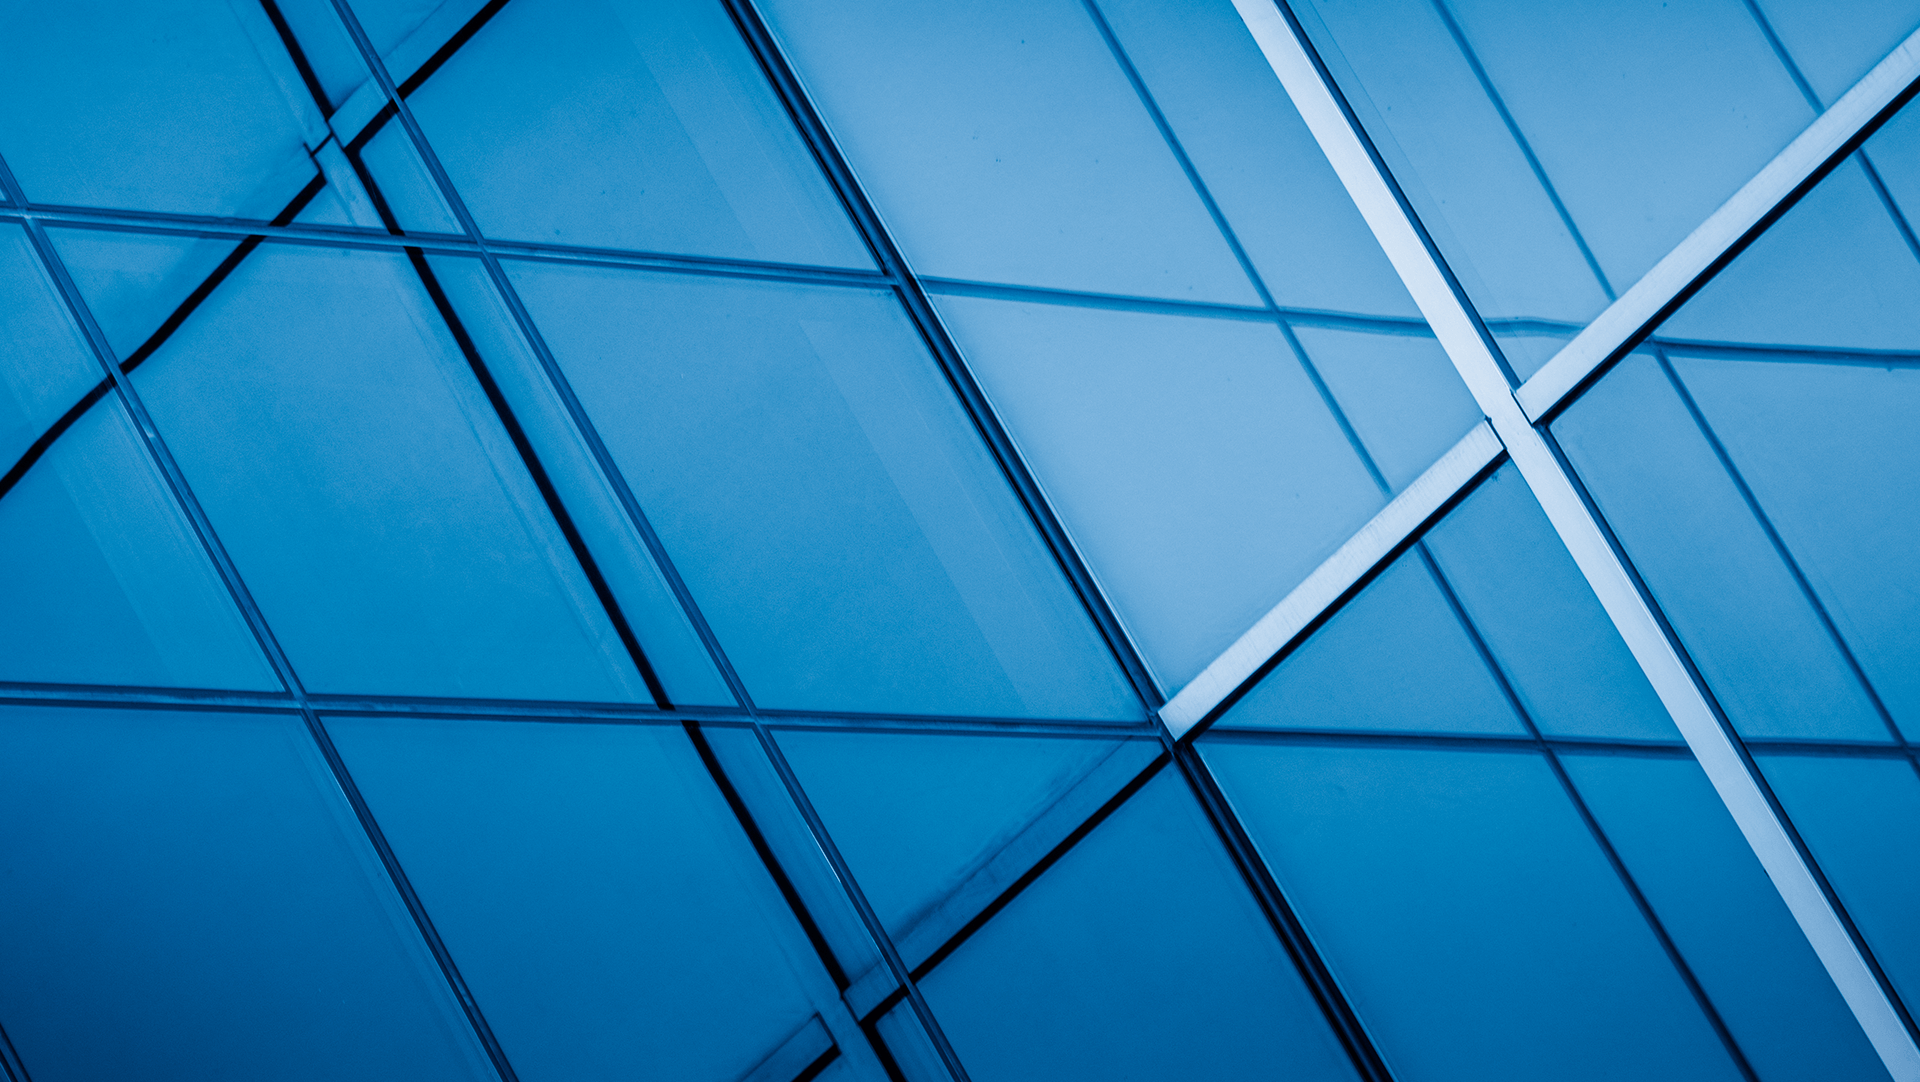 Abstract view of a modern glass building facade with geometric patterns and a cool blue tint.